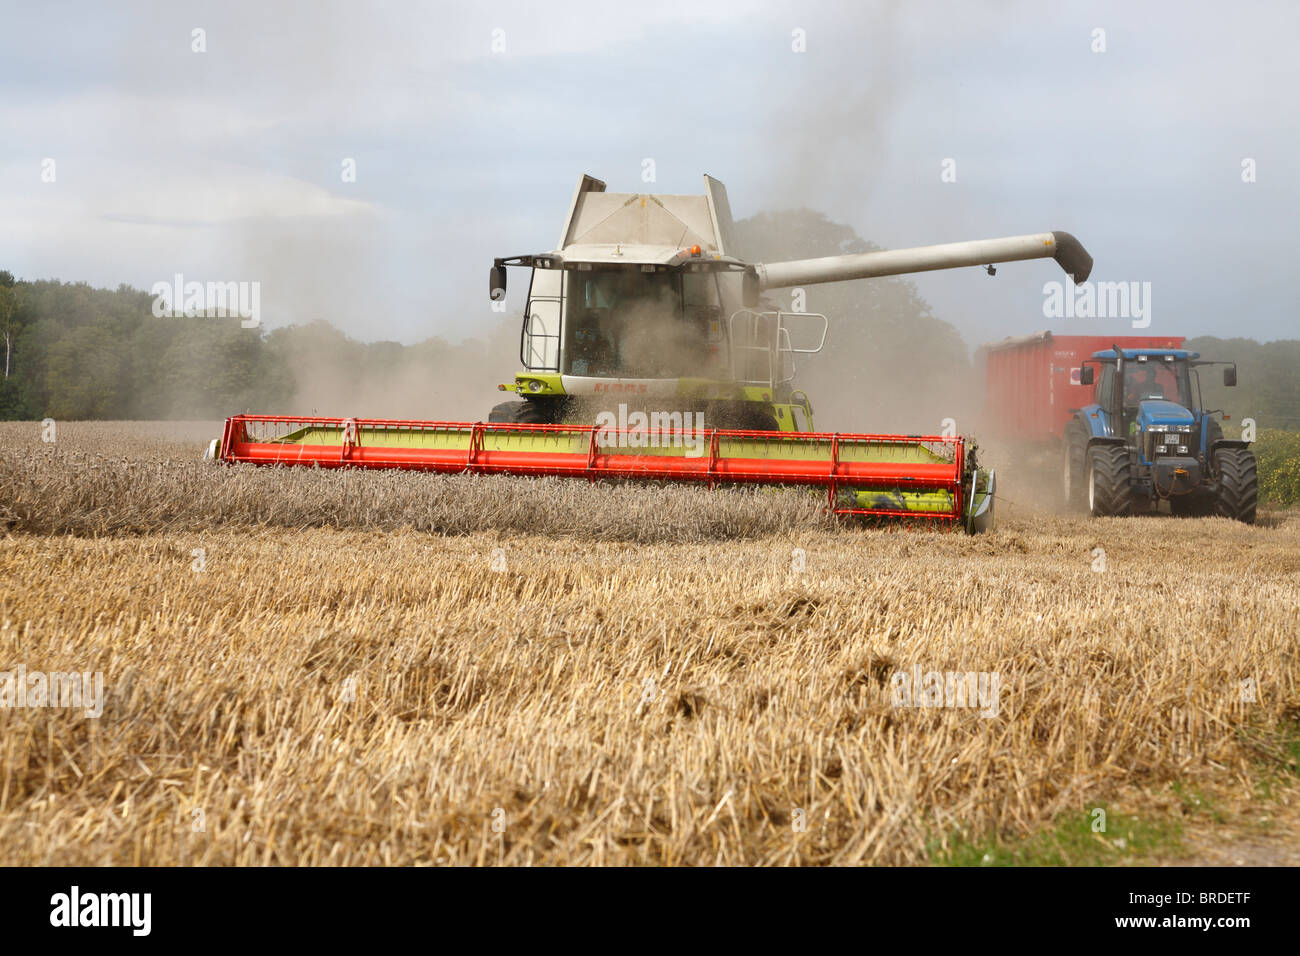 Combine harvester preparing the auger for emptying a load of wheat into the trailer while harvesting a wheat field, Denmark Stock Photo